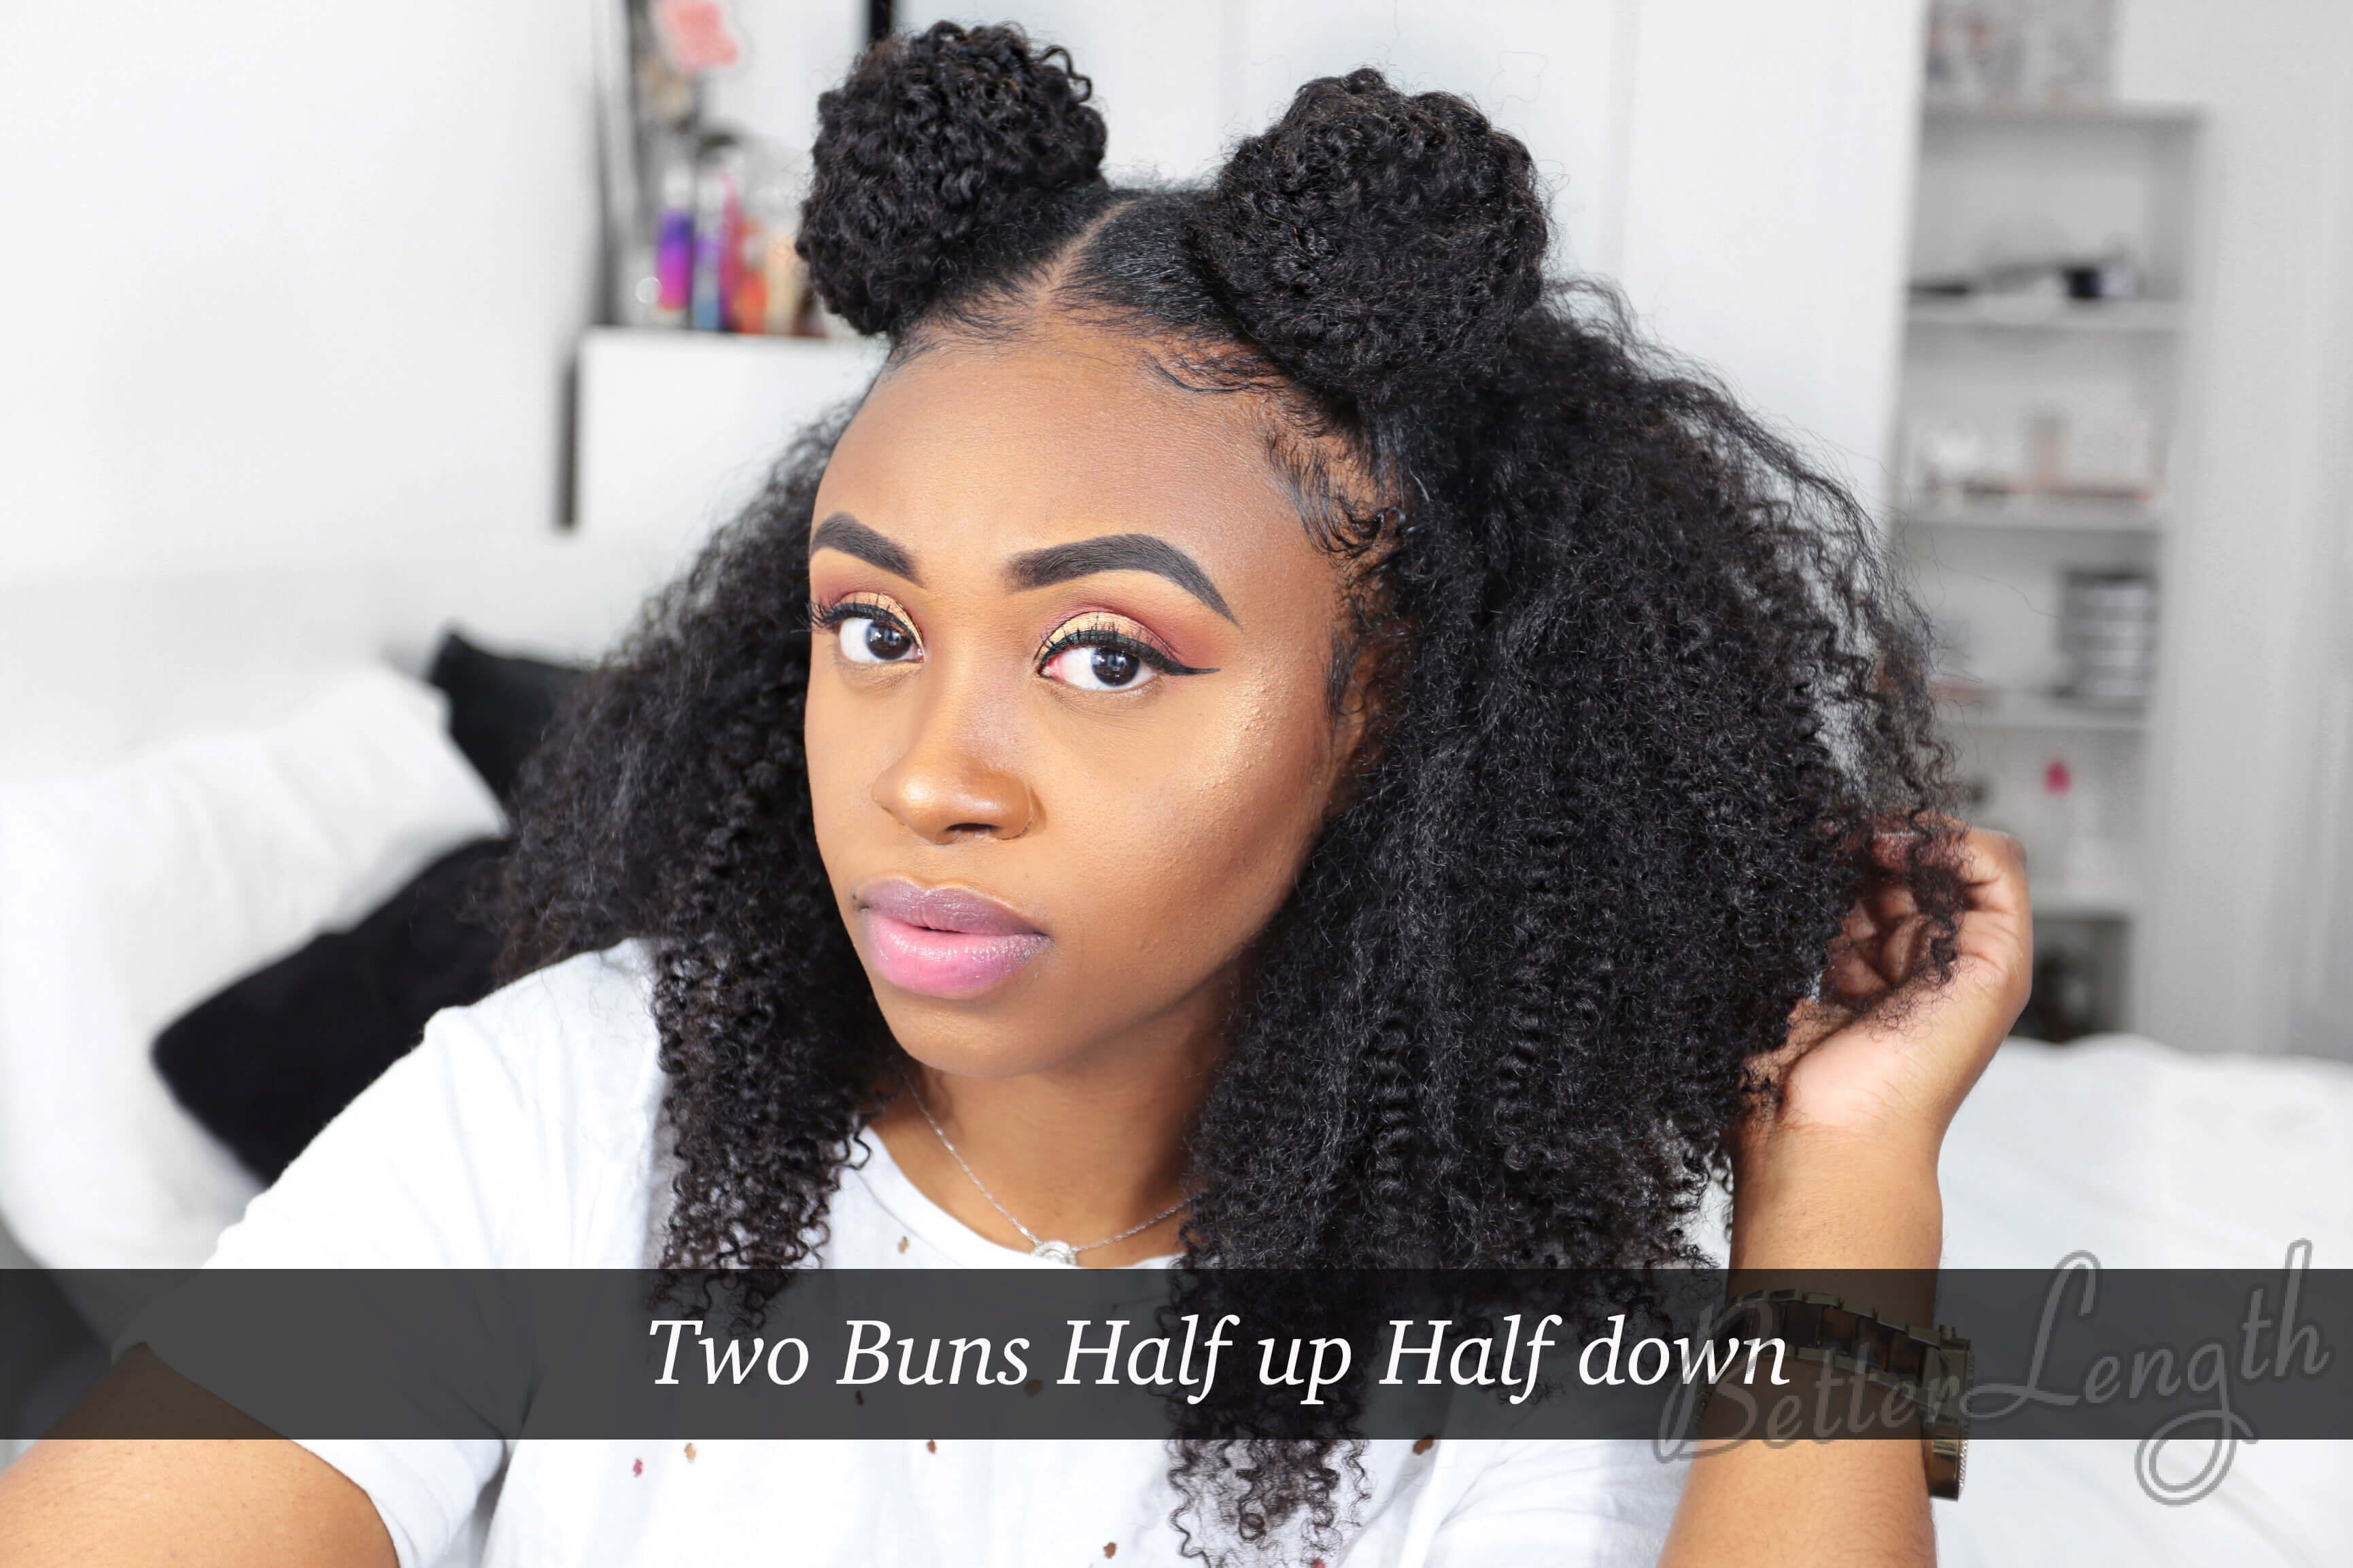 Twobunshalfupandhalfdownhairstsyle - Top 4 Quick and Easy Bun Hairstyles for Back to School